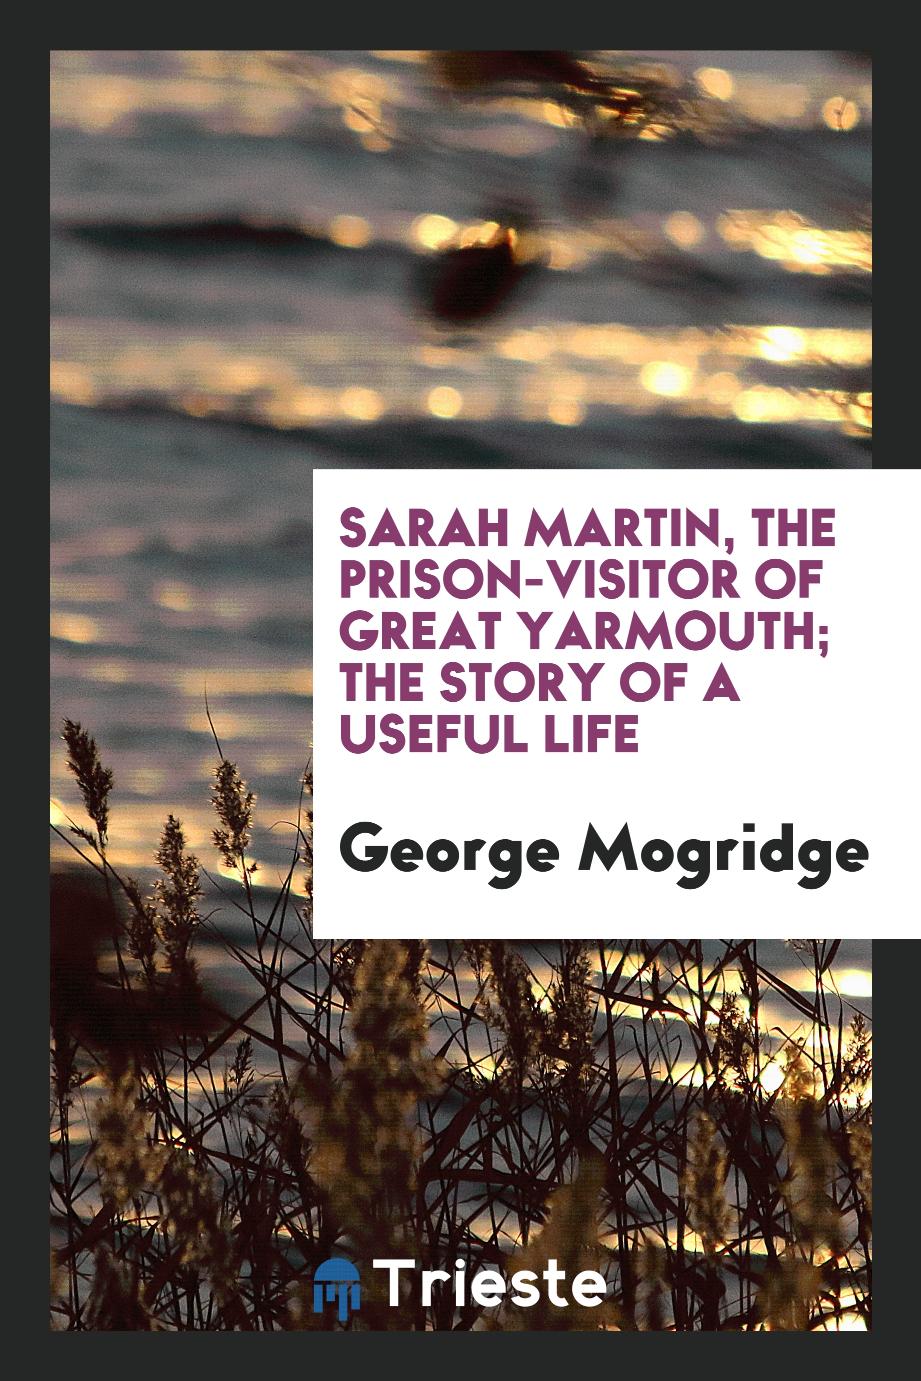 Sarah Martin, the Prison-Visitor of Great Yarmouth; The Story of a Useful Life